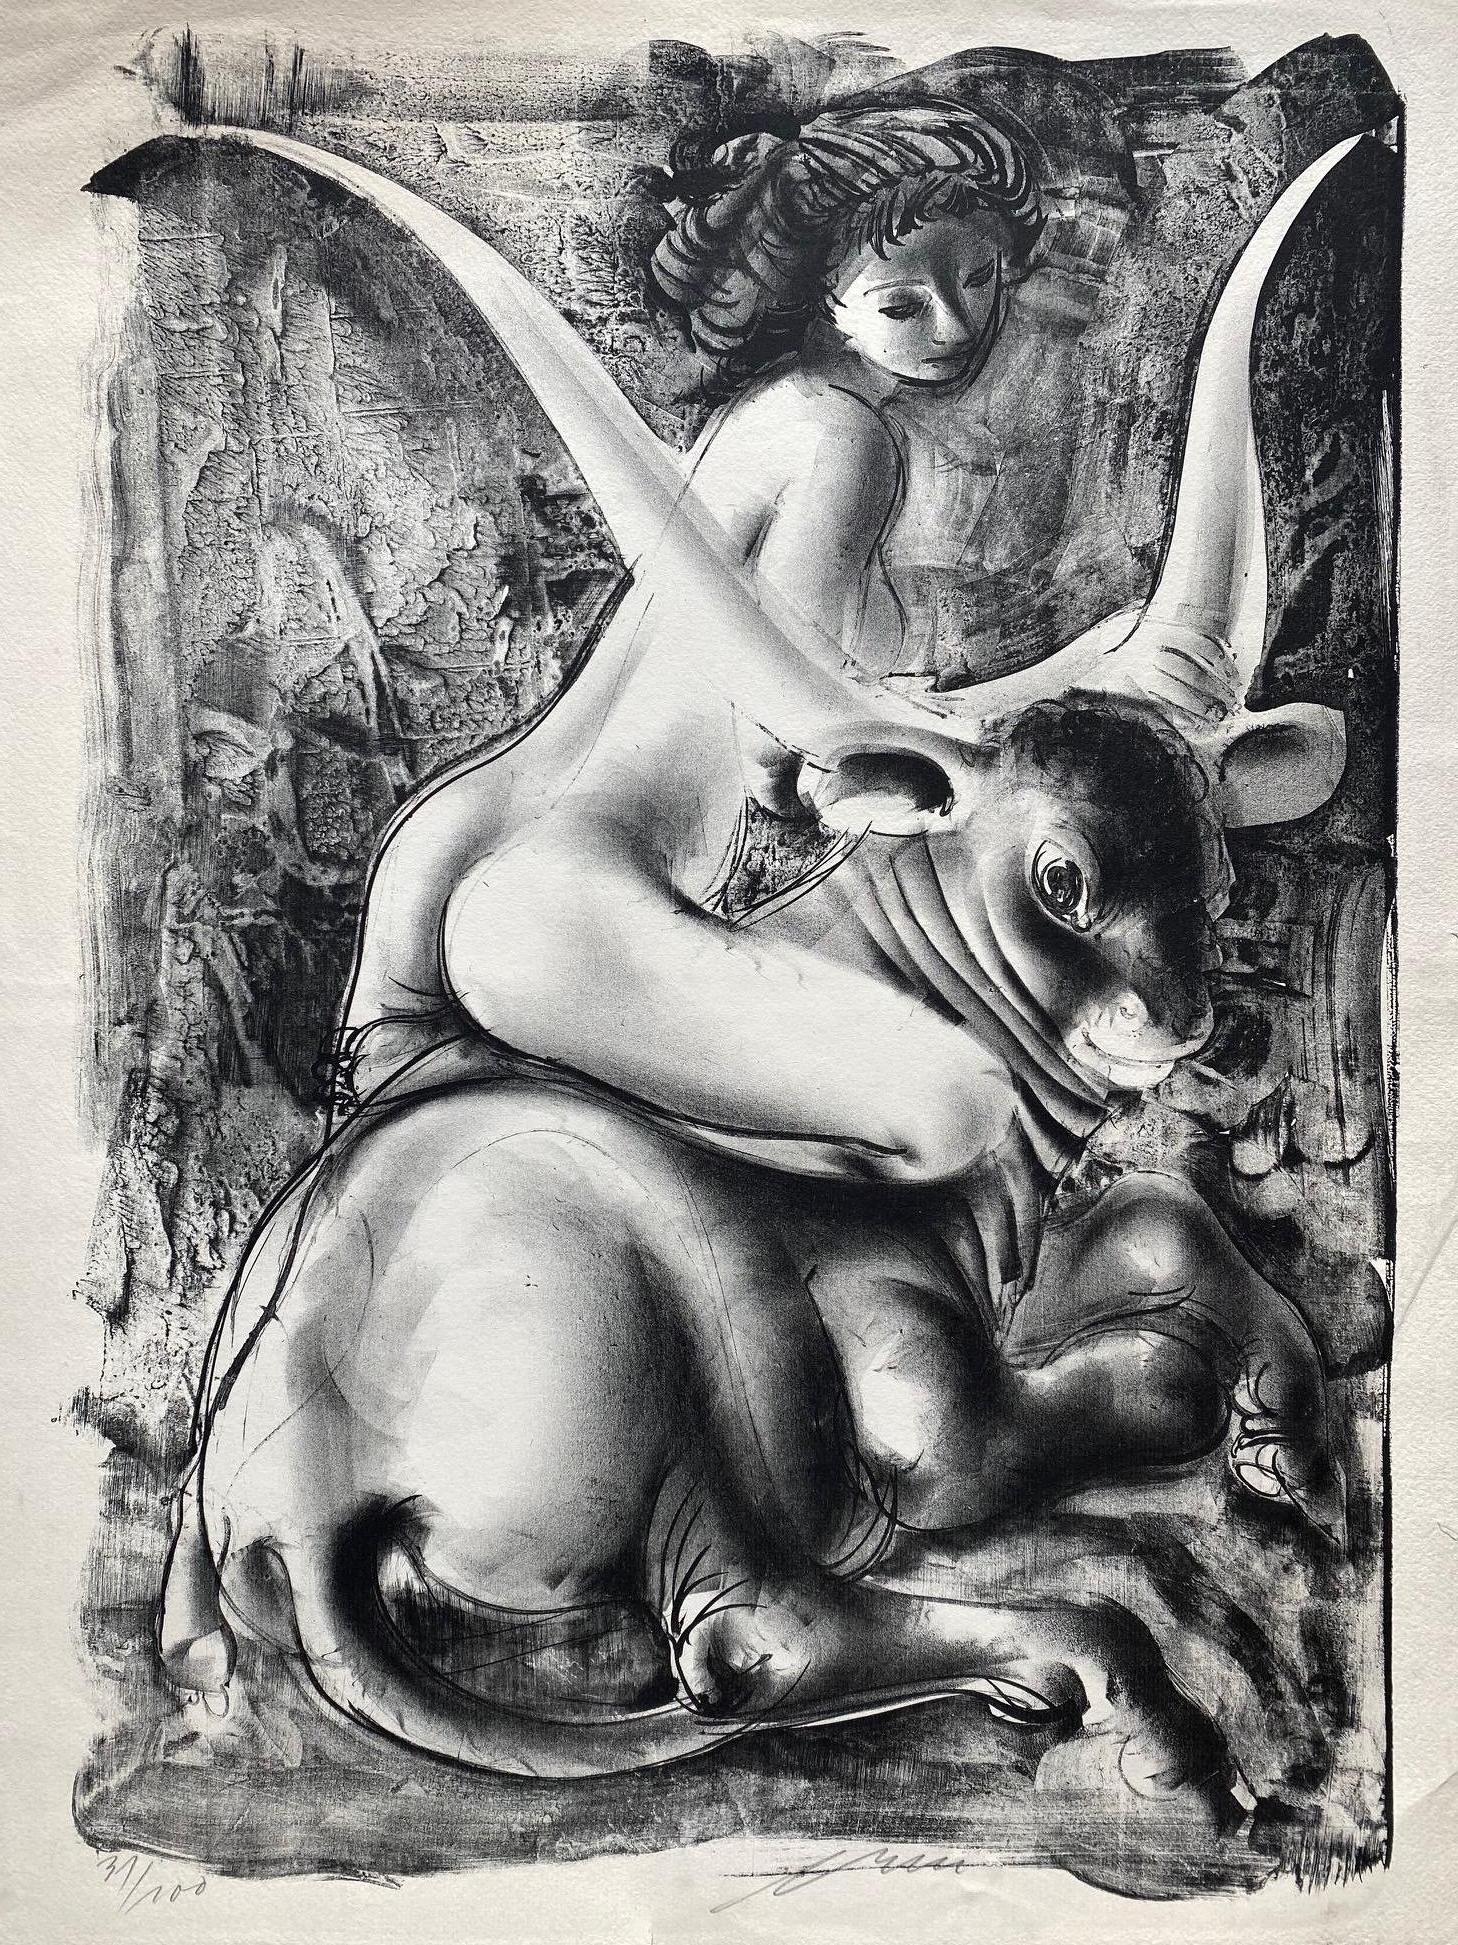 Hans ERNI is an artist born in Switzerland in 1909 and died in 2015. His works have been sold at public auction 3,987 times, mostly in the Print-Multiple category. The oldest auction recorded on our site is Nude couple with horse sold in 1985 at